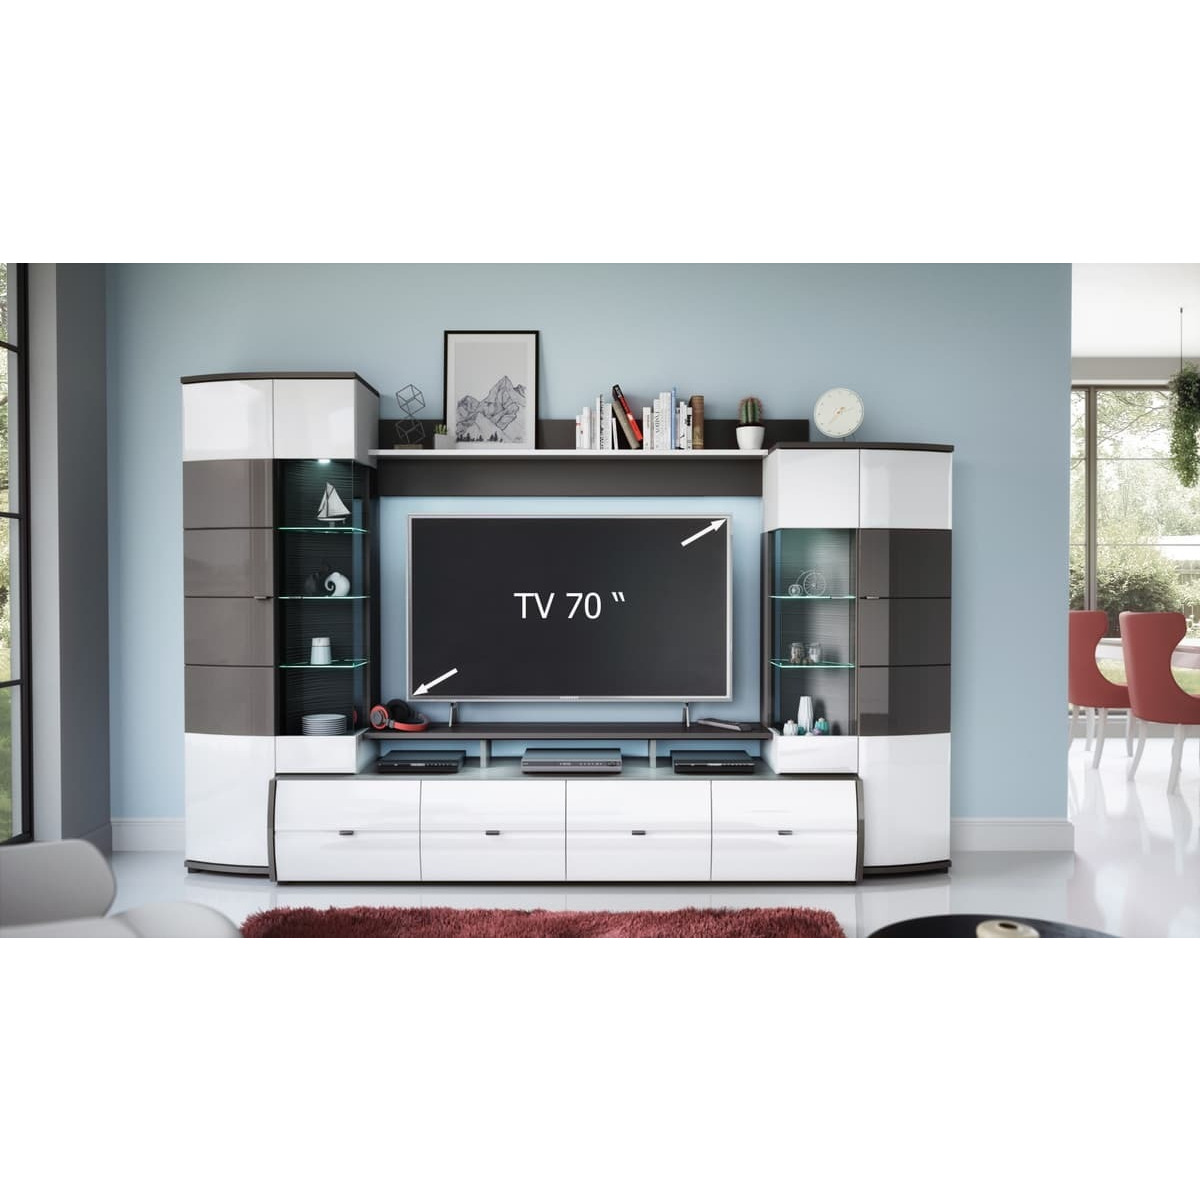 "Trendy Entertainment Unit For TVs Up To 70"" - White Gloss 300cm" - image 1